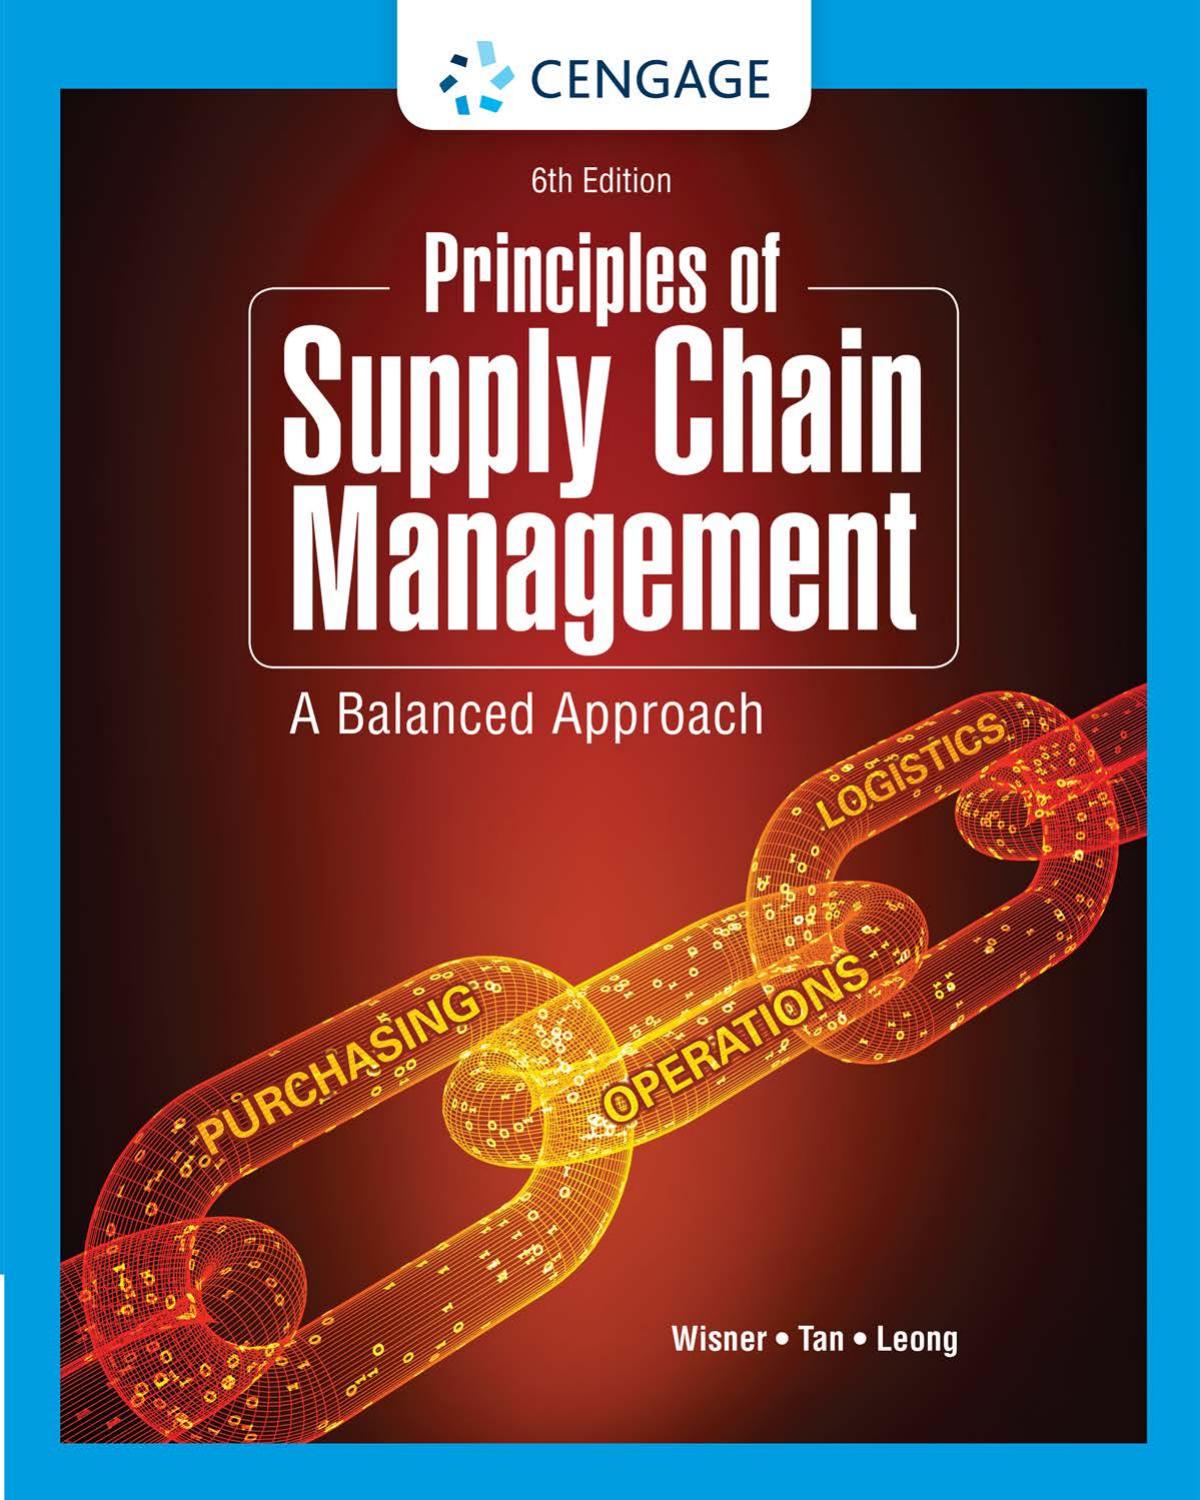 Principles of Supply Chain Management: A Balanced Approach by G. Leong Keah-Choon Tan Joel Wisner